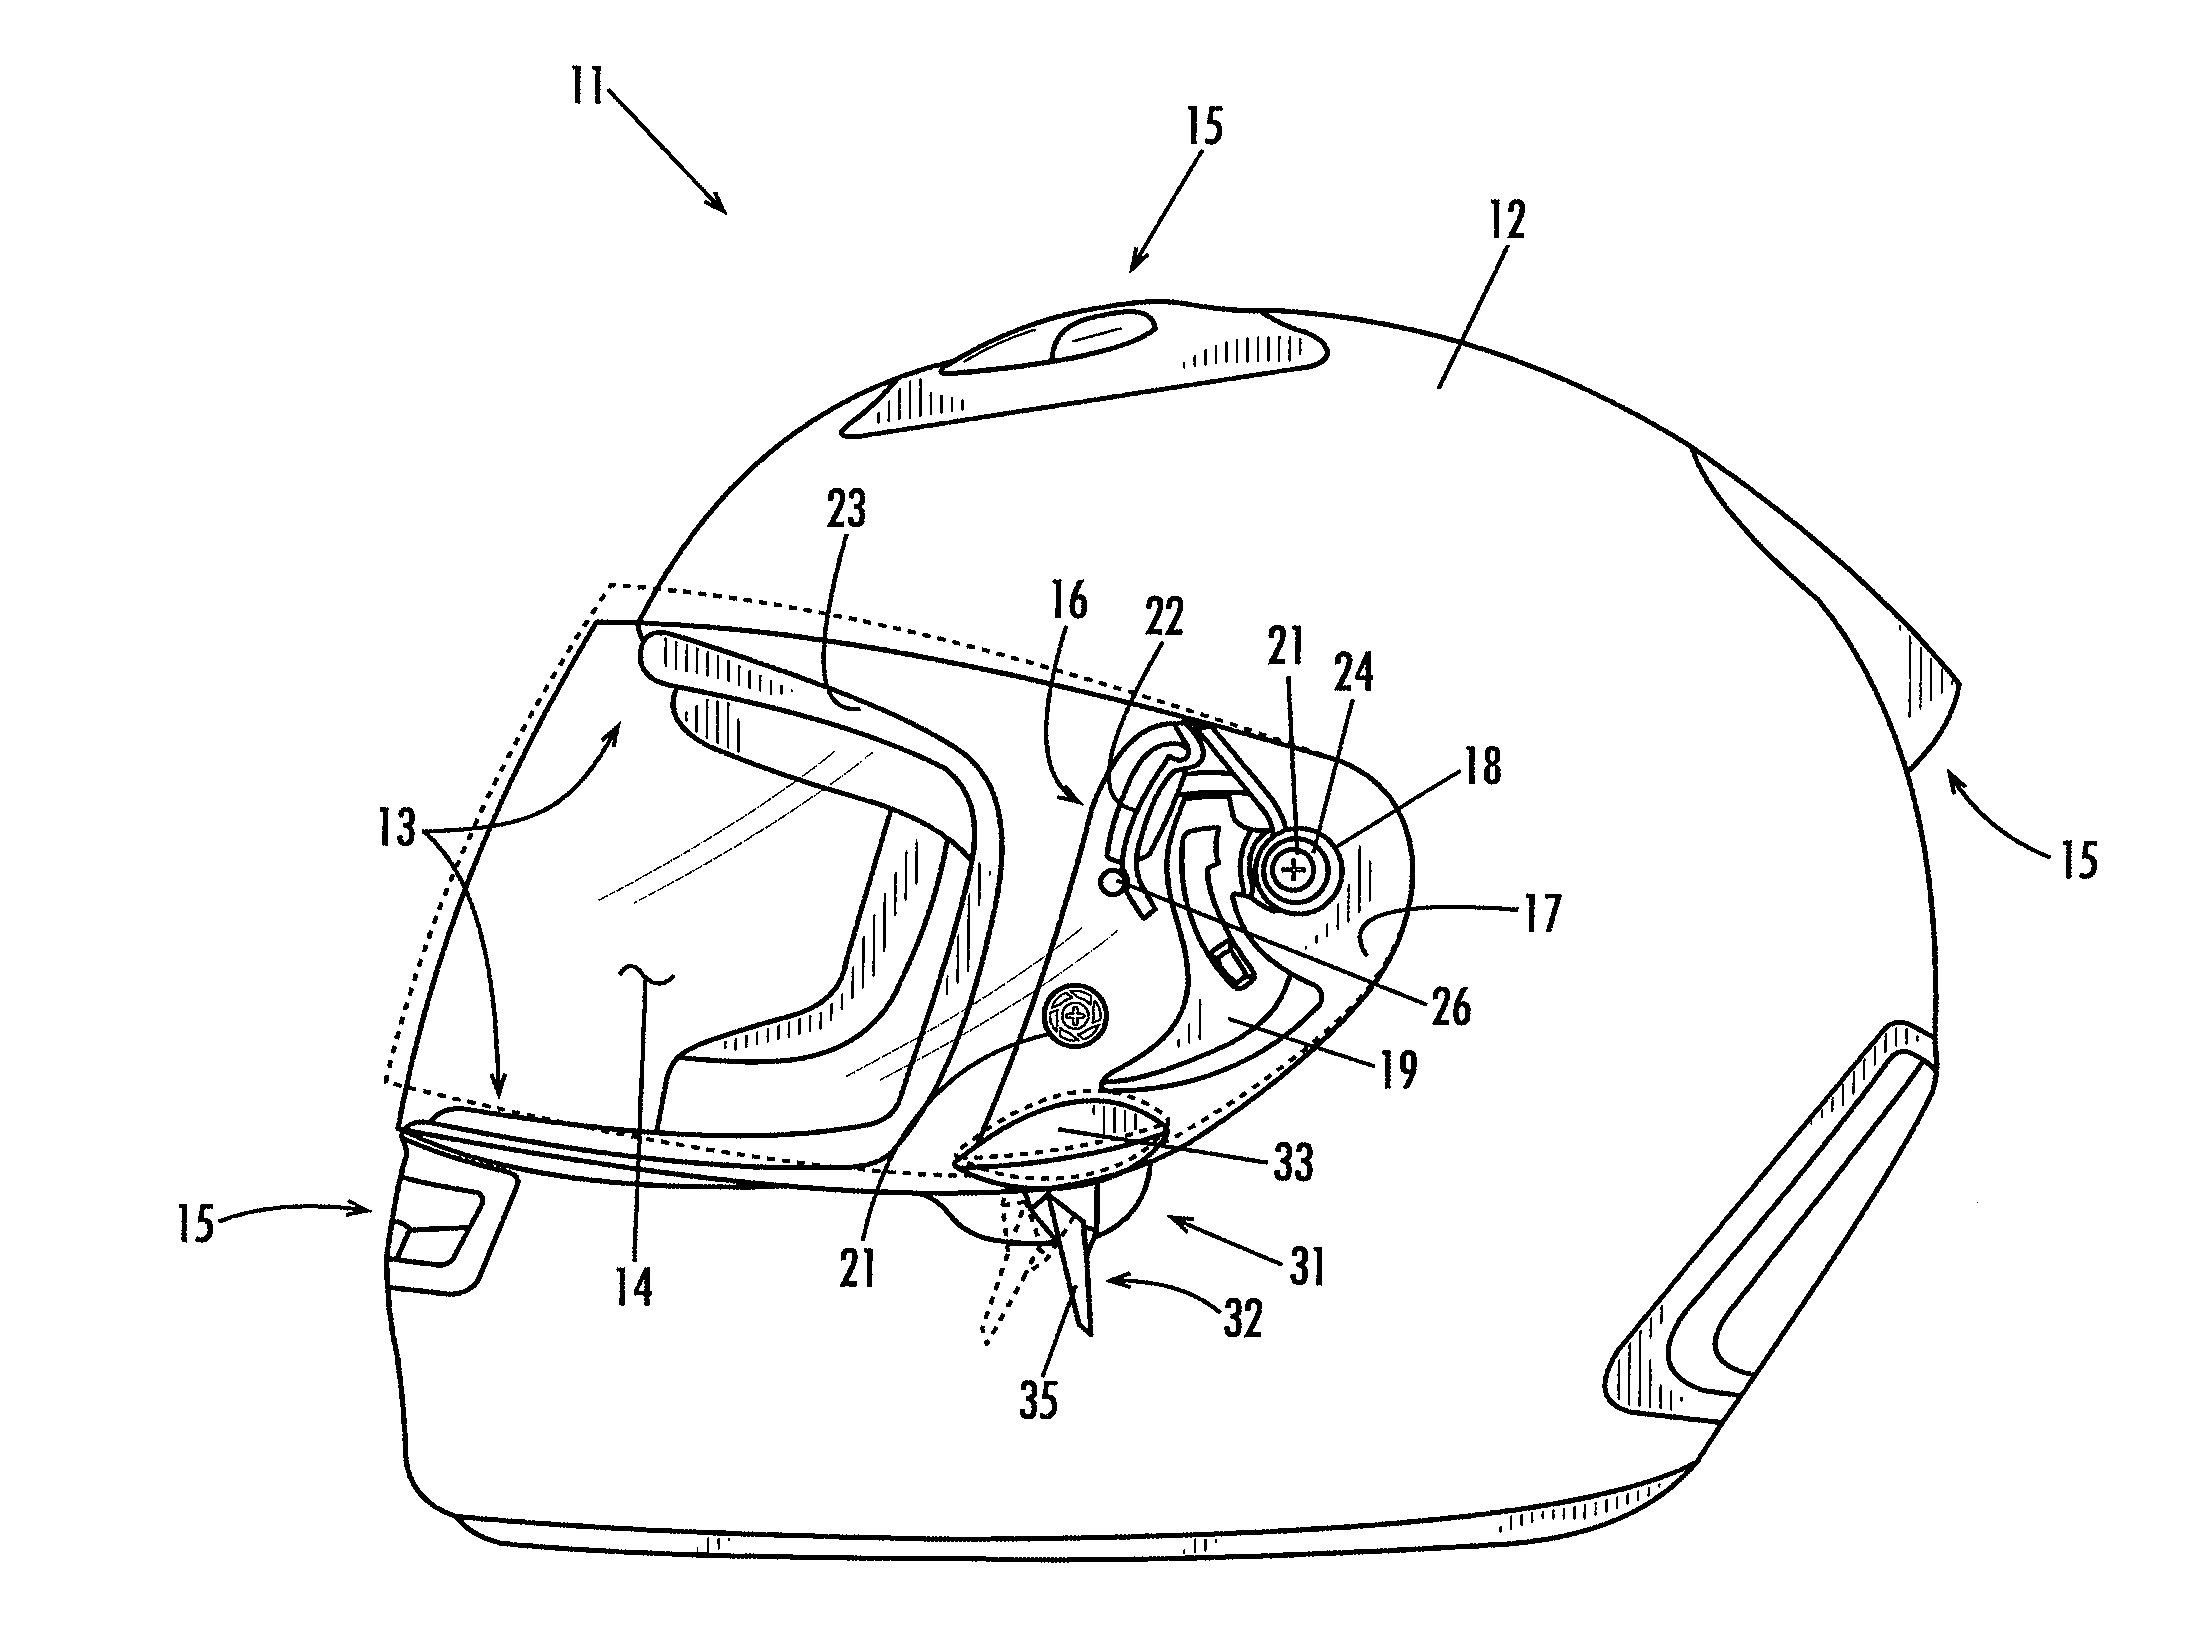 Helmet with Improved Shield Mount and Precision Shield Control